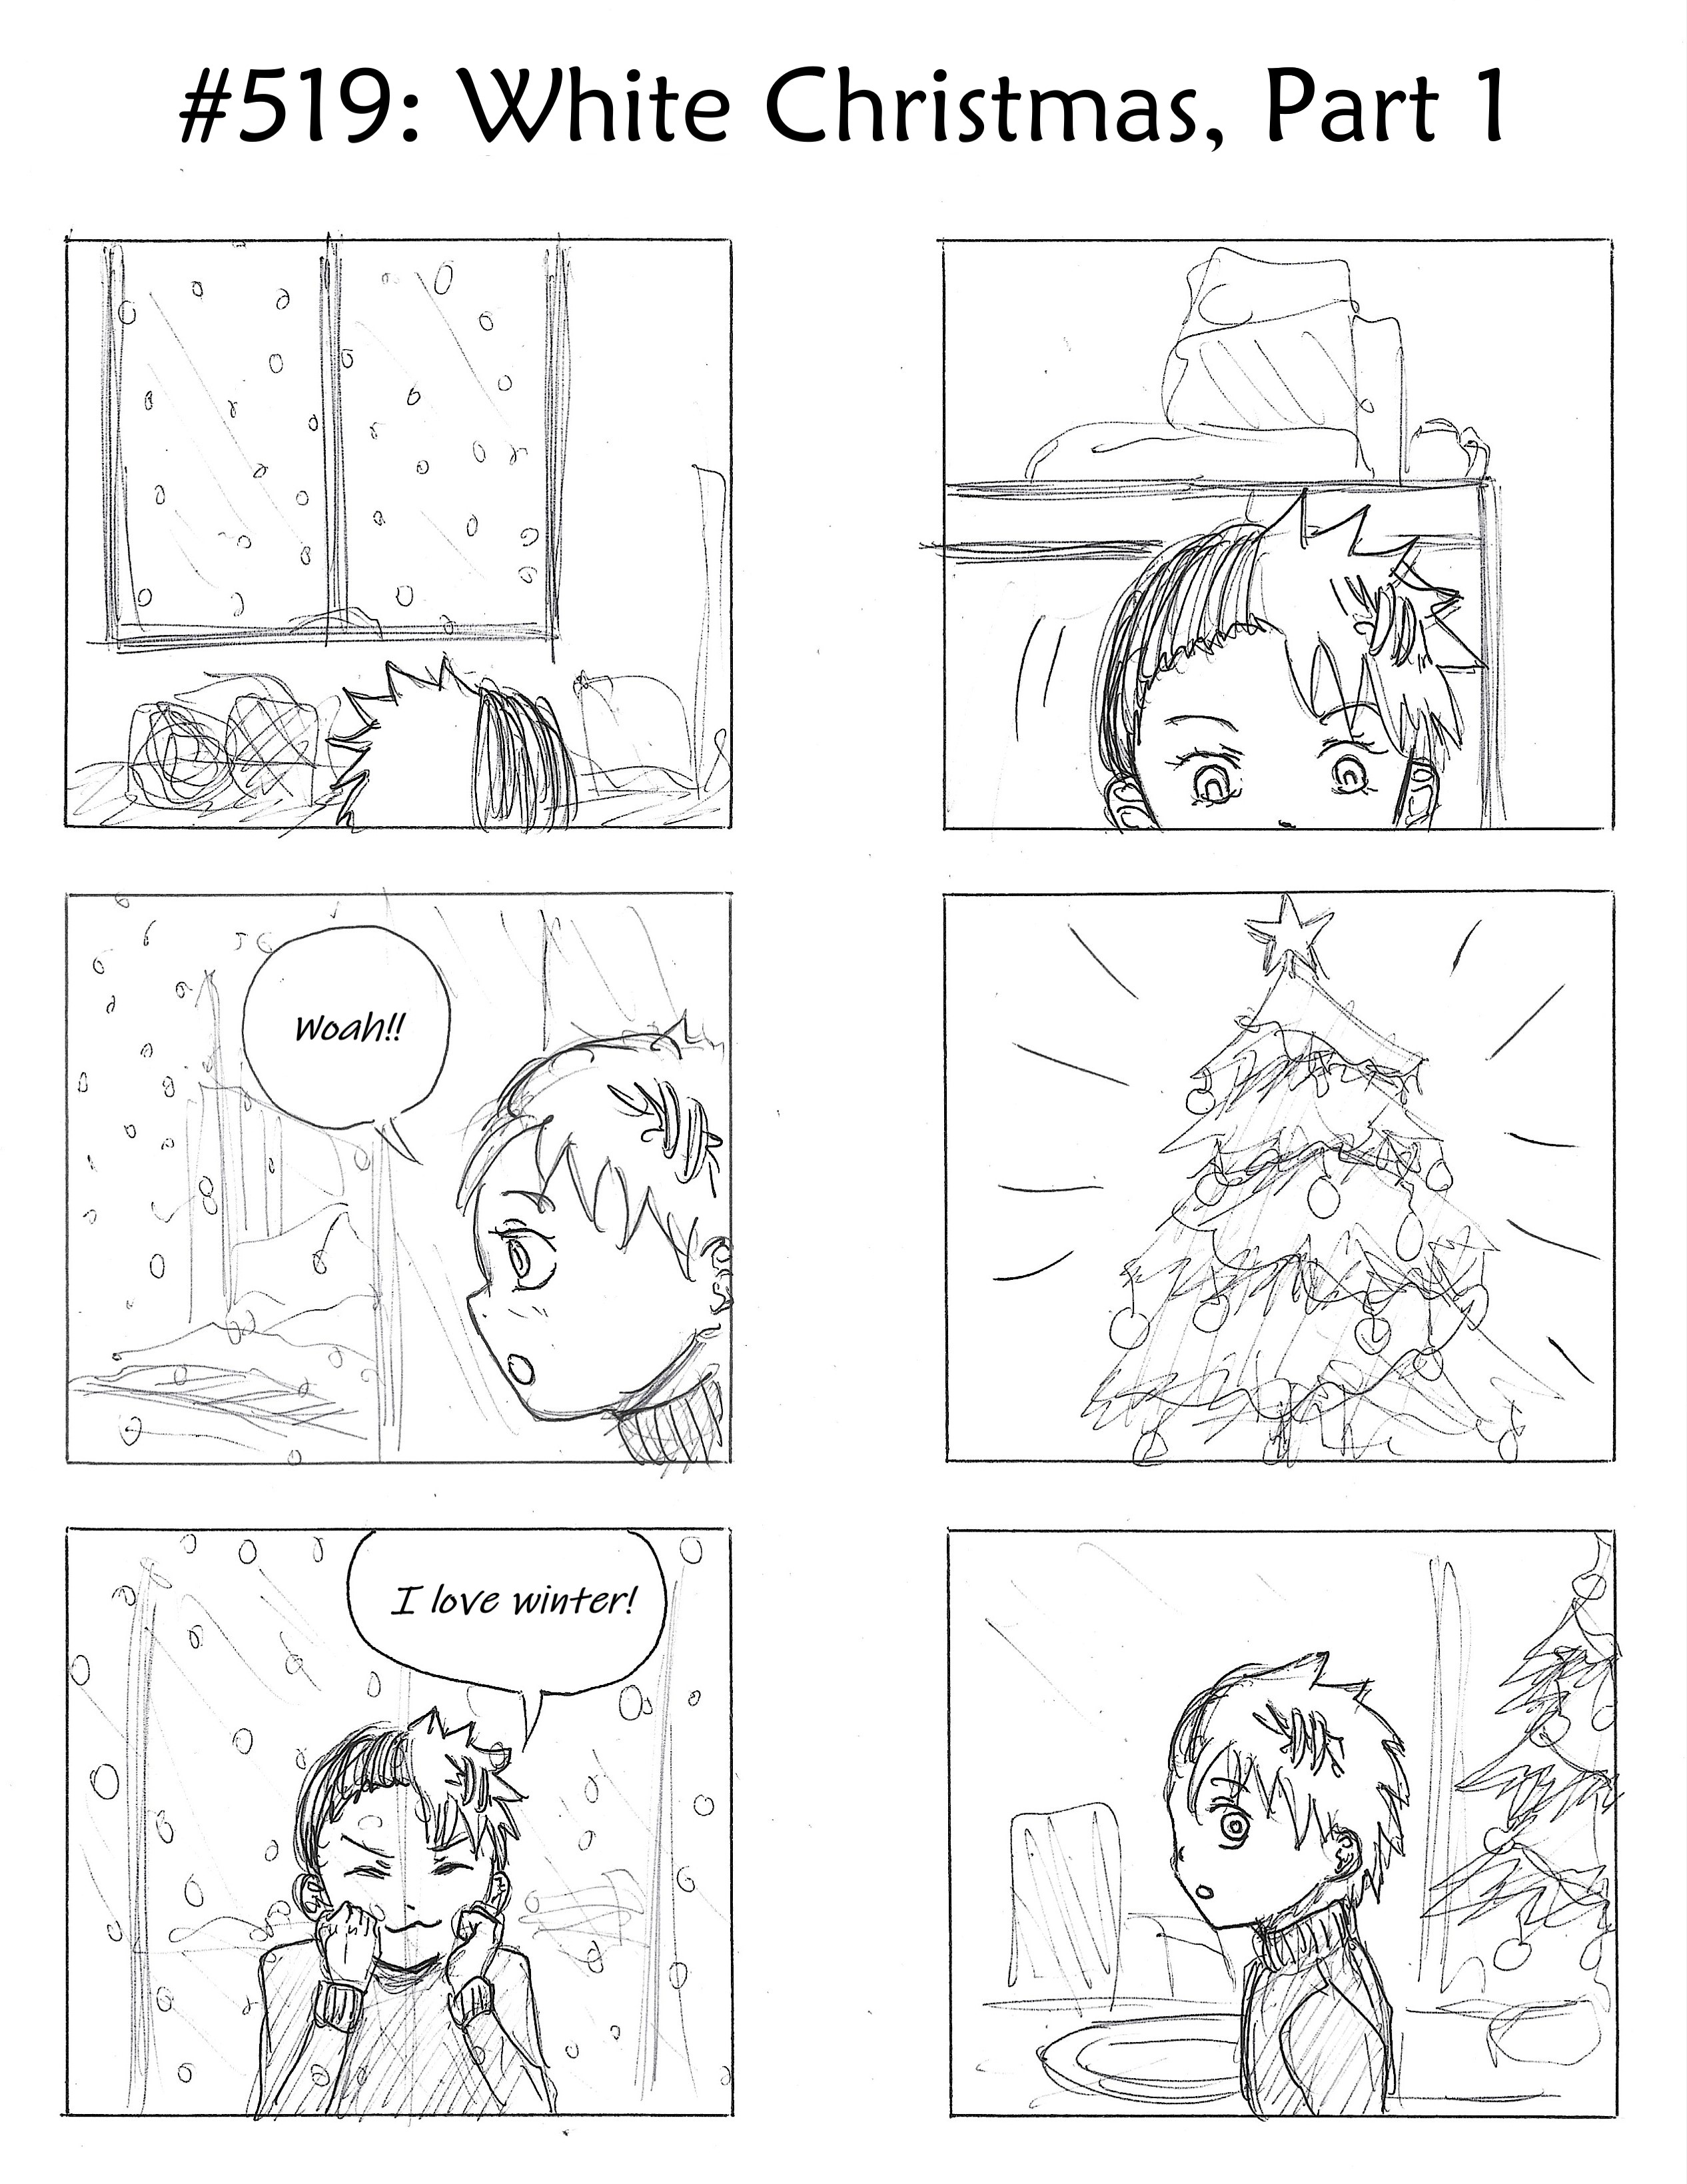 Sound Asleep: Forgotten Memories Vol.5 Chapter 519: White Christmas, Part 1 - Picture 1